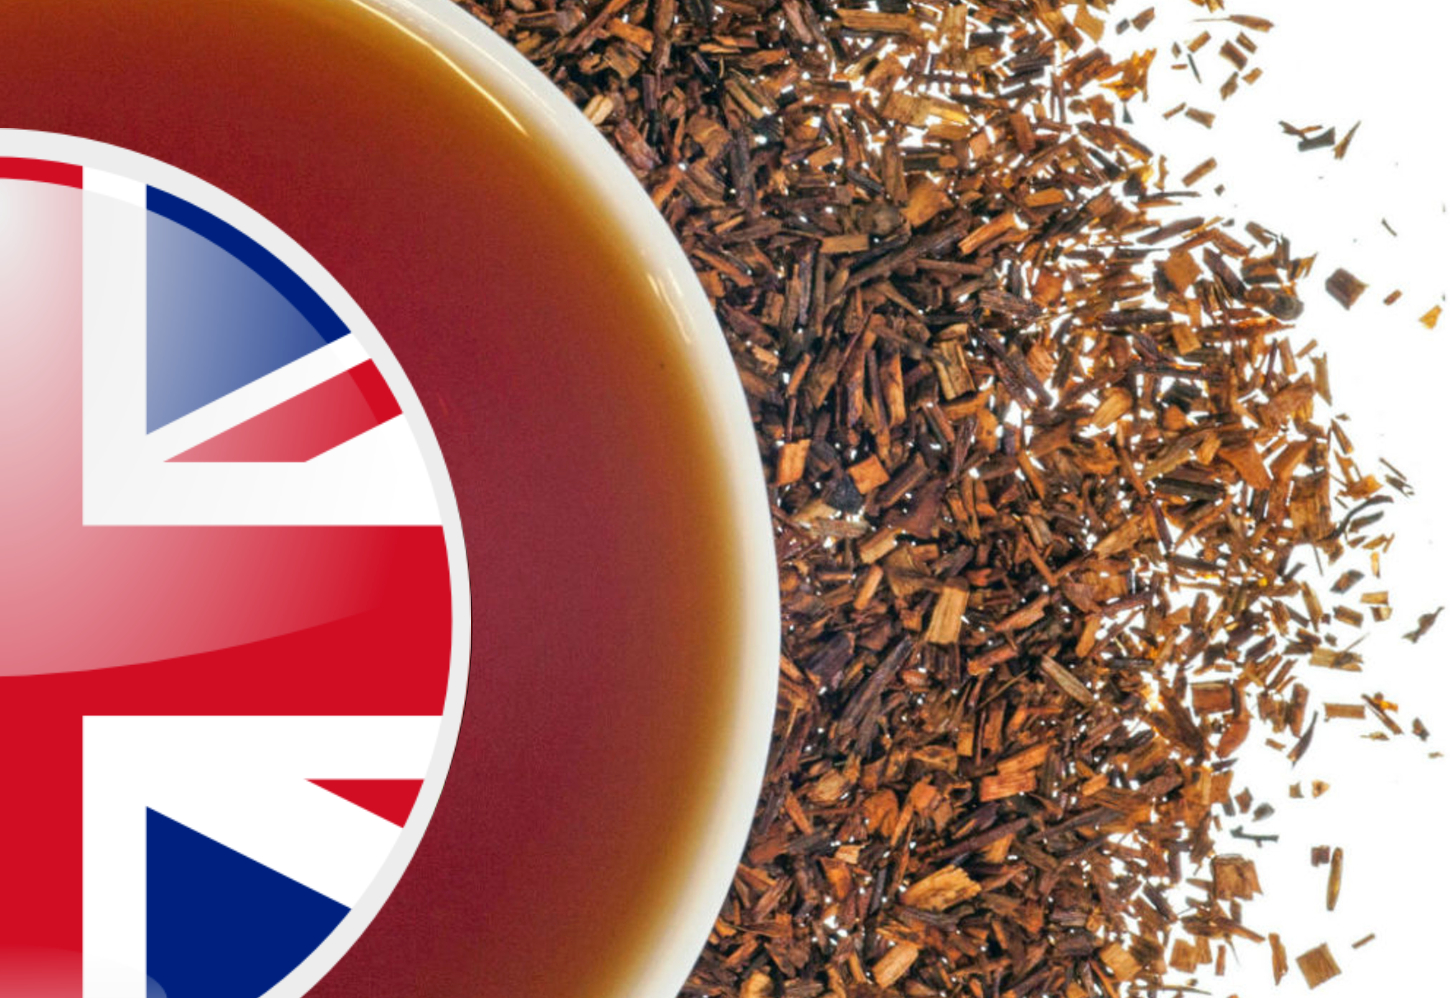 UK rooibos history and marketplace info